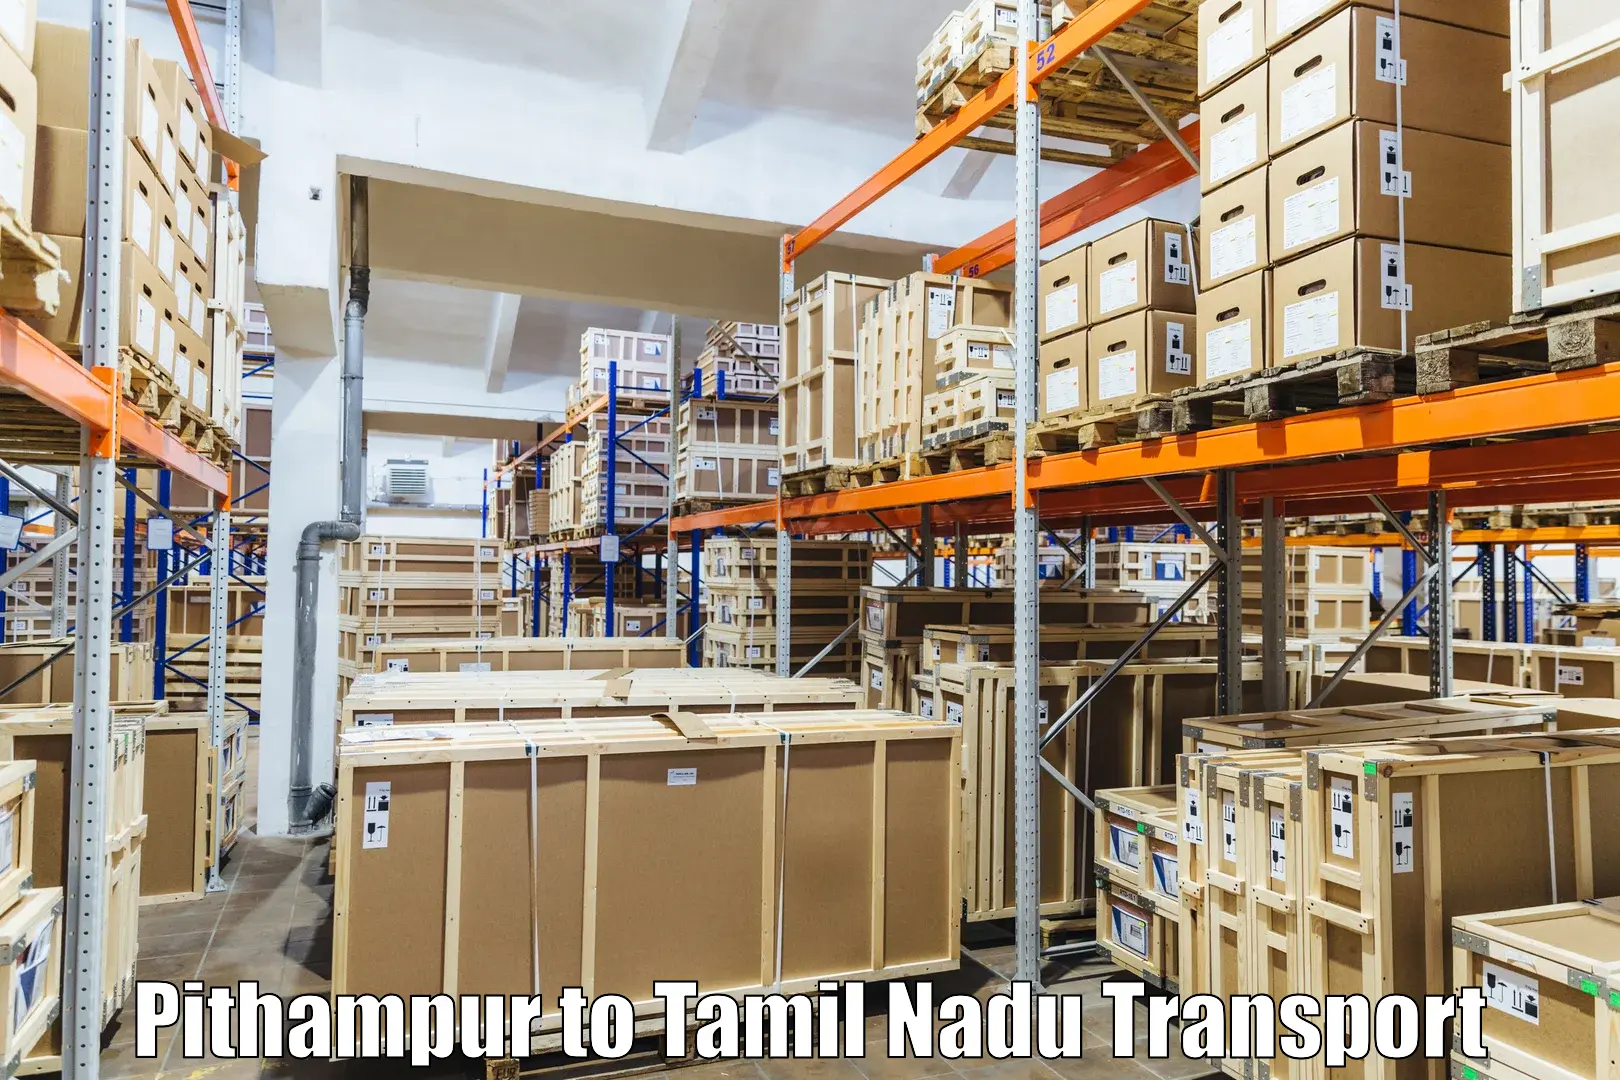 Daily parcel service transport in Pithampur to Kovilpatti